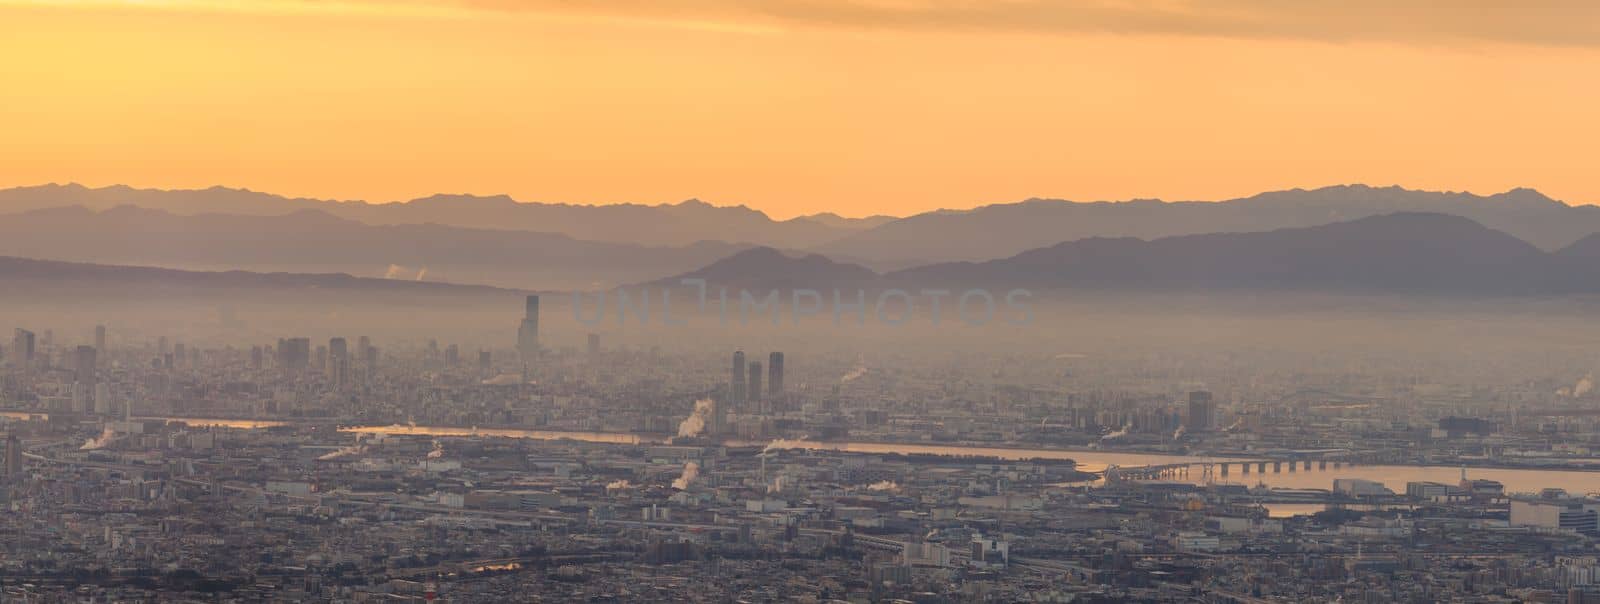 Panoramic view of haze layer over city with orange glow in sky at sunrise by Osaze